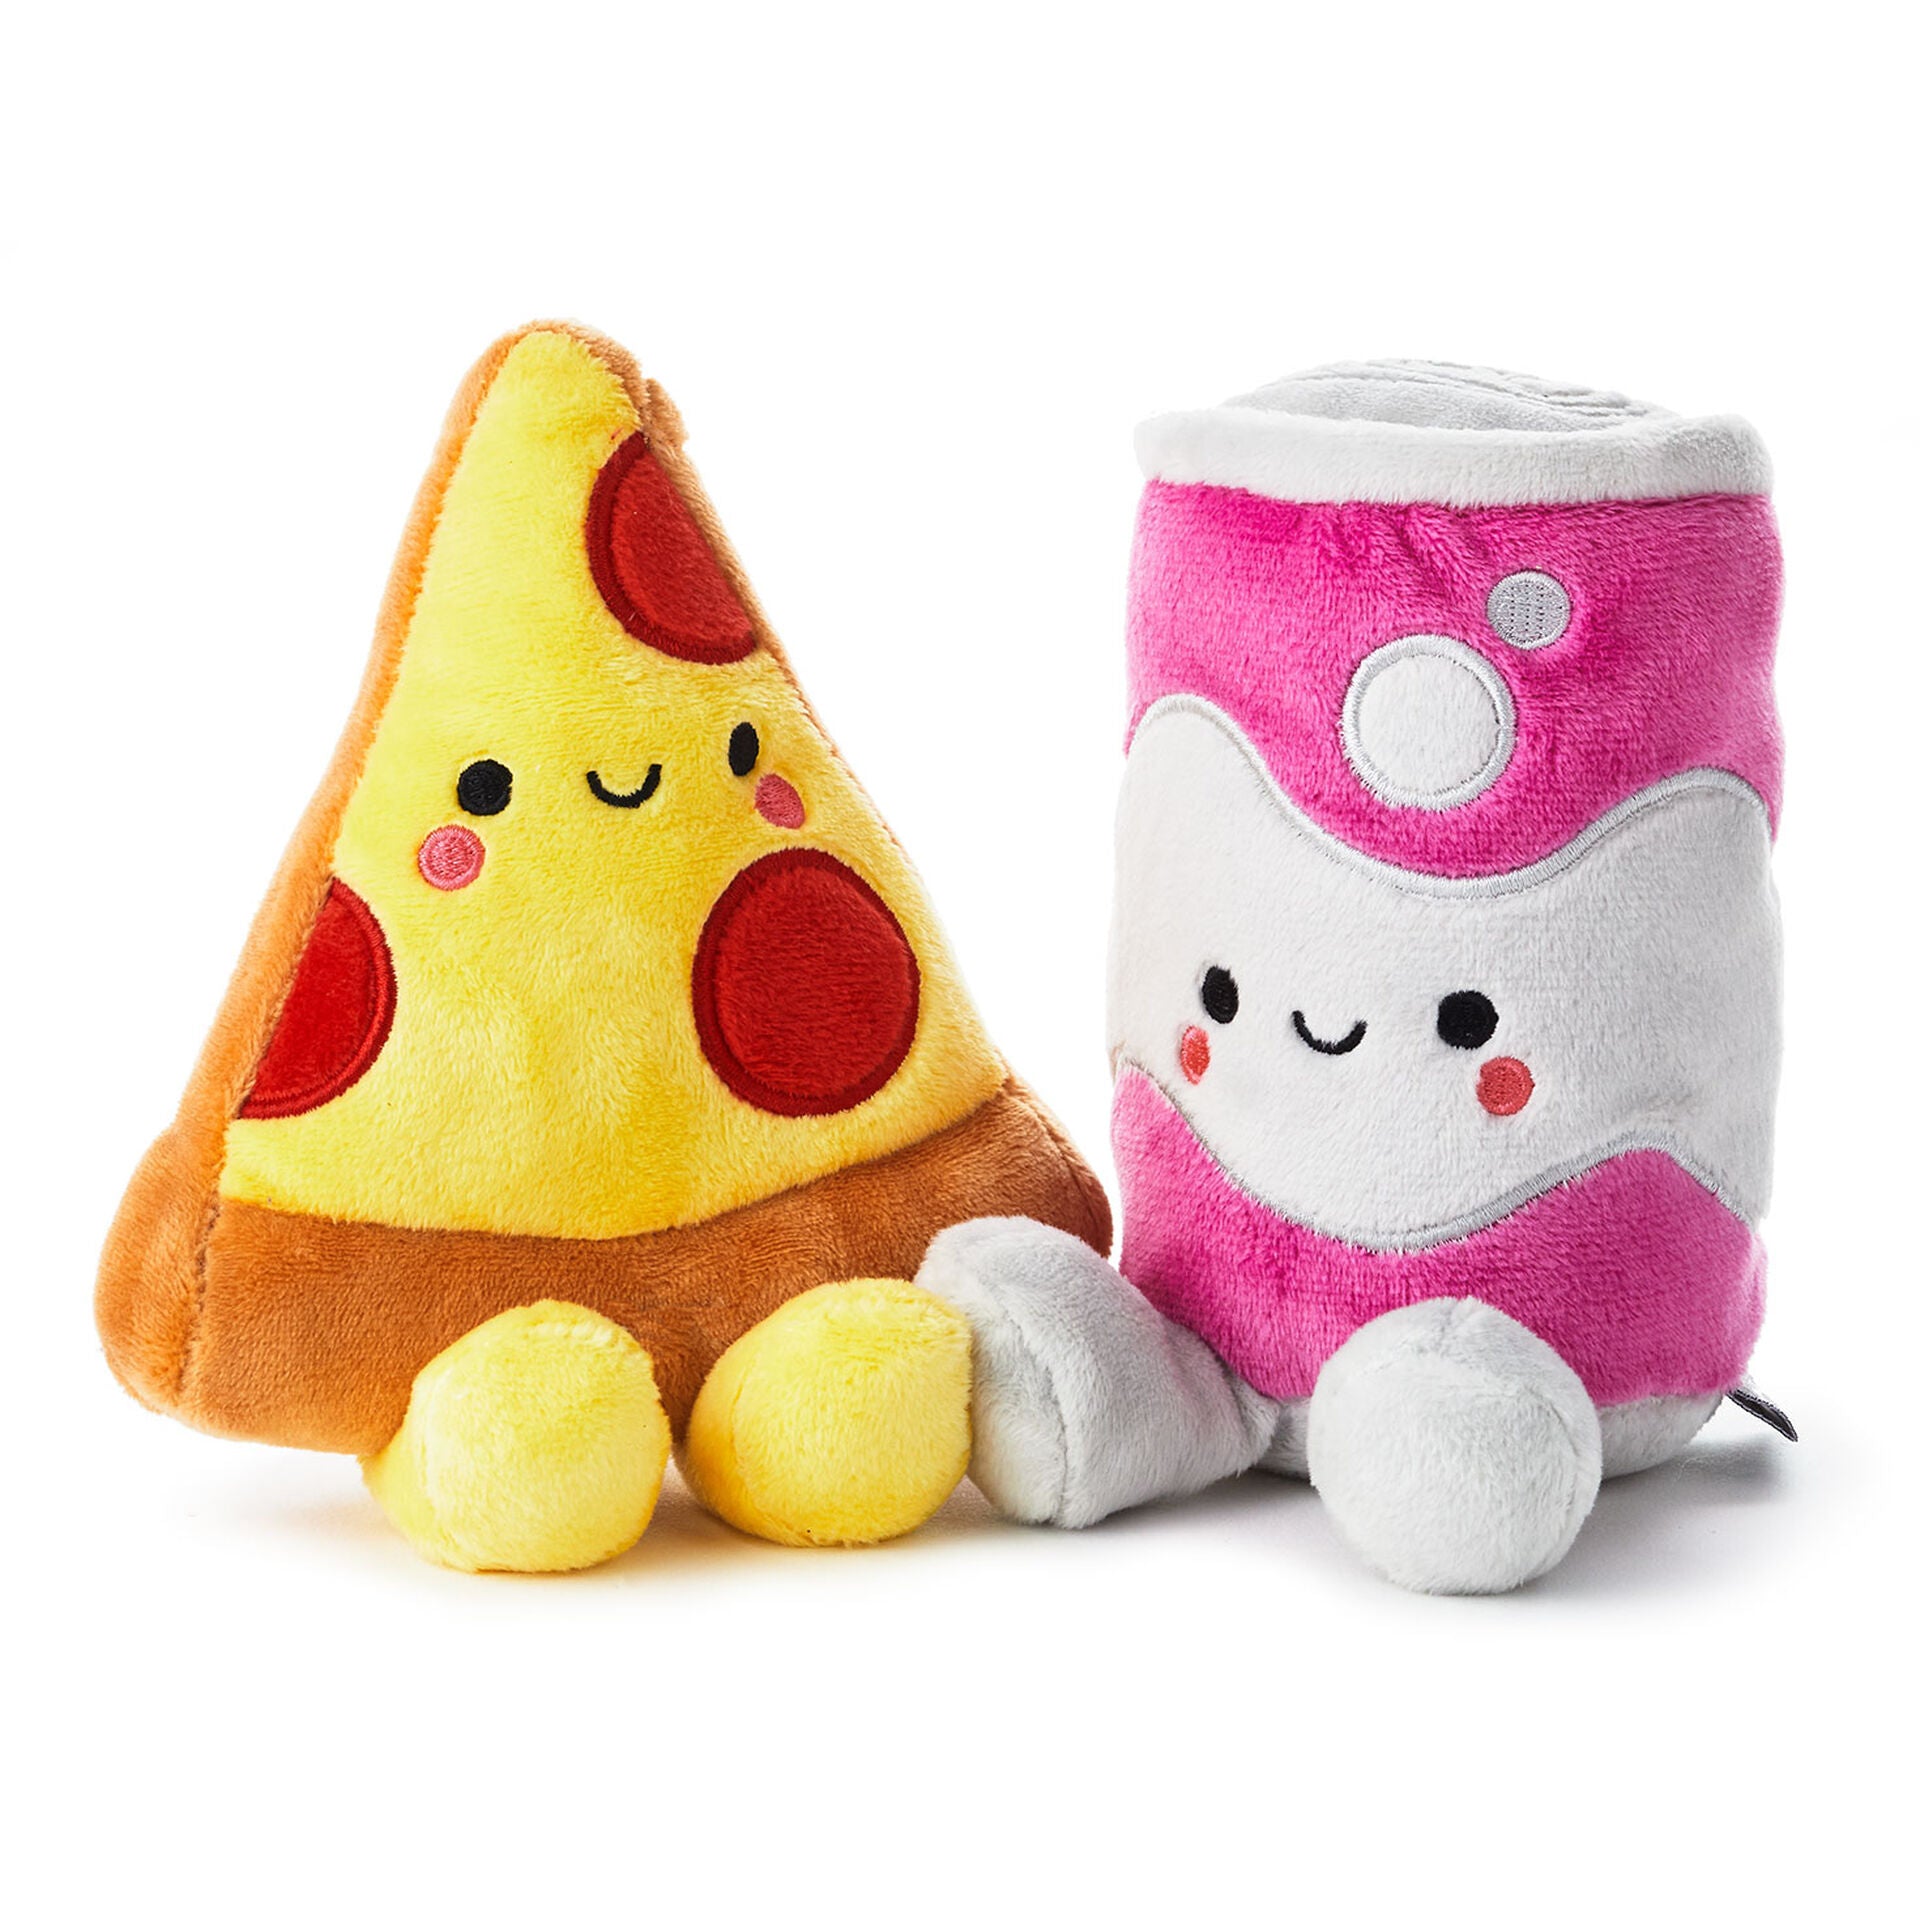 Better Together Pizza and Soda Magnetic Plush